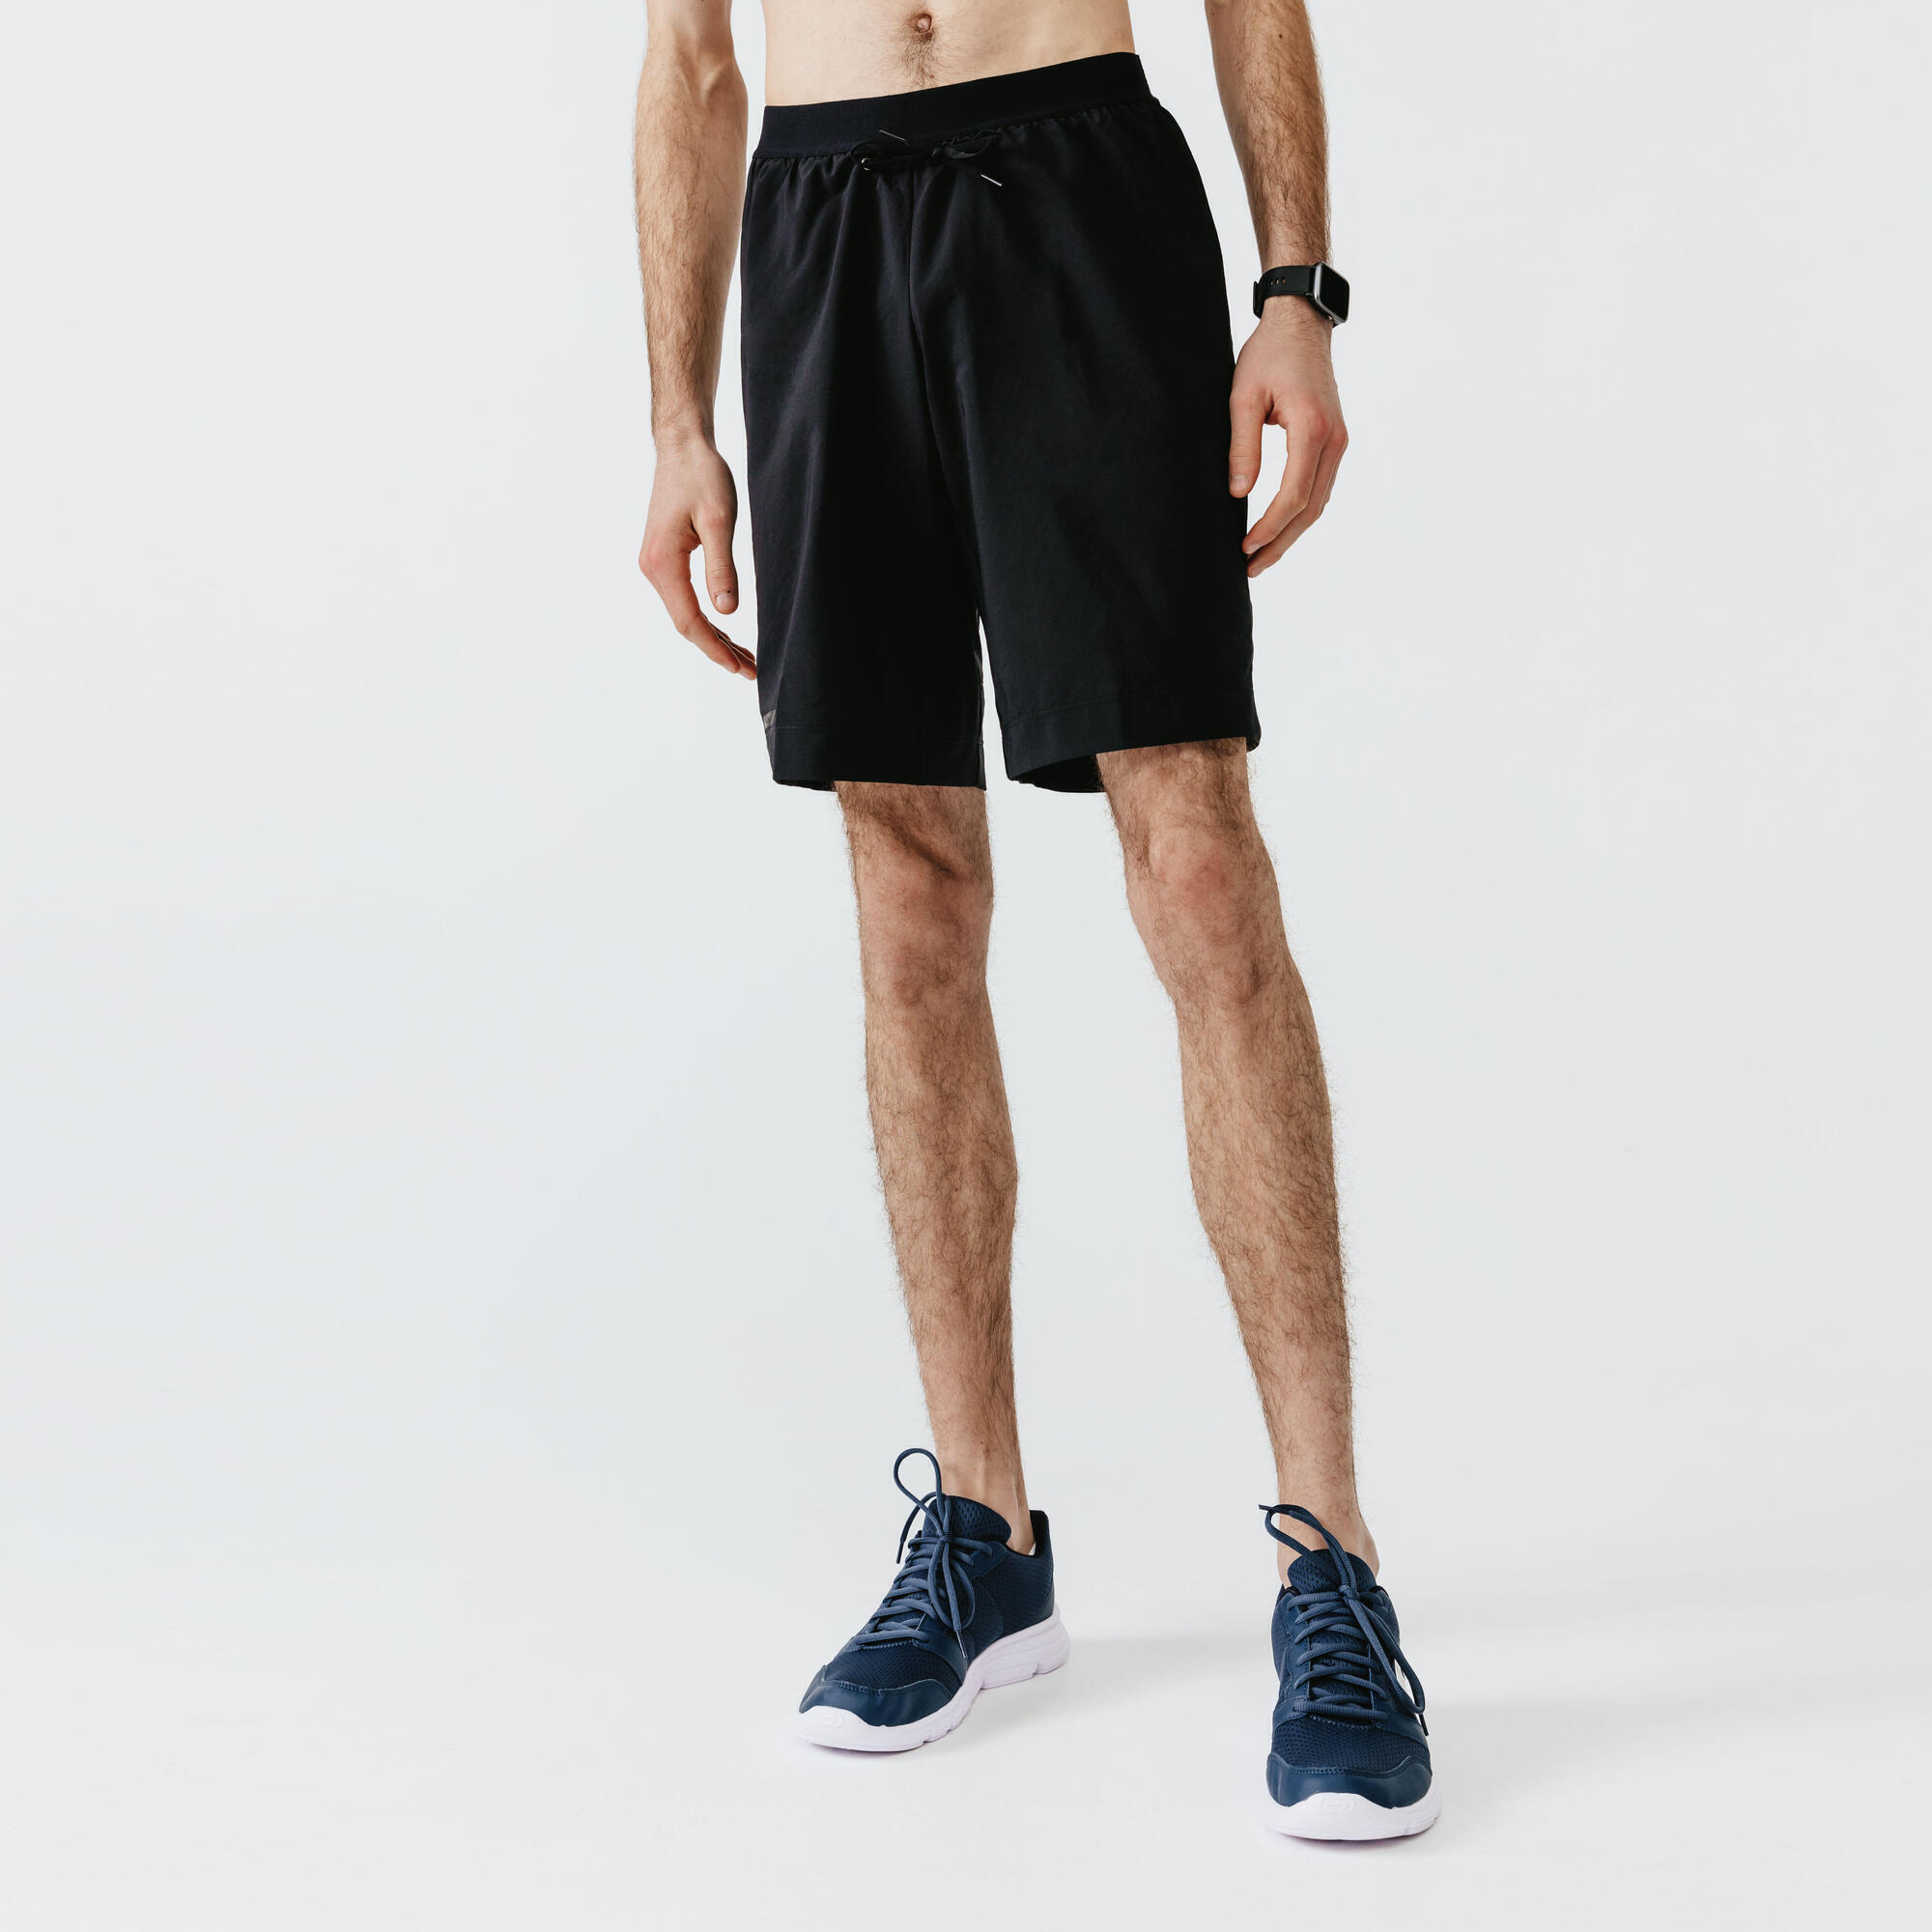 Dry+ Men's Running 2-in-1 Shorts With Boxer - Black 2/8